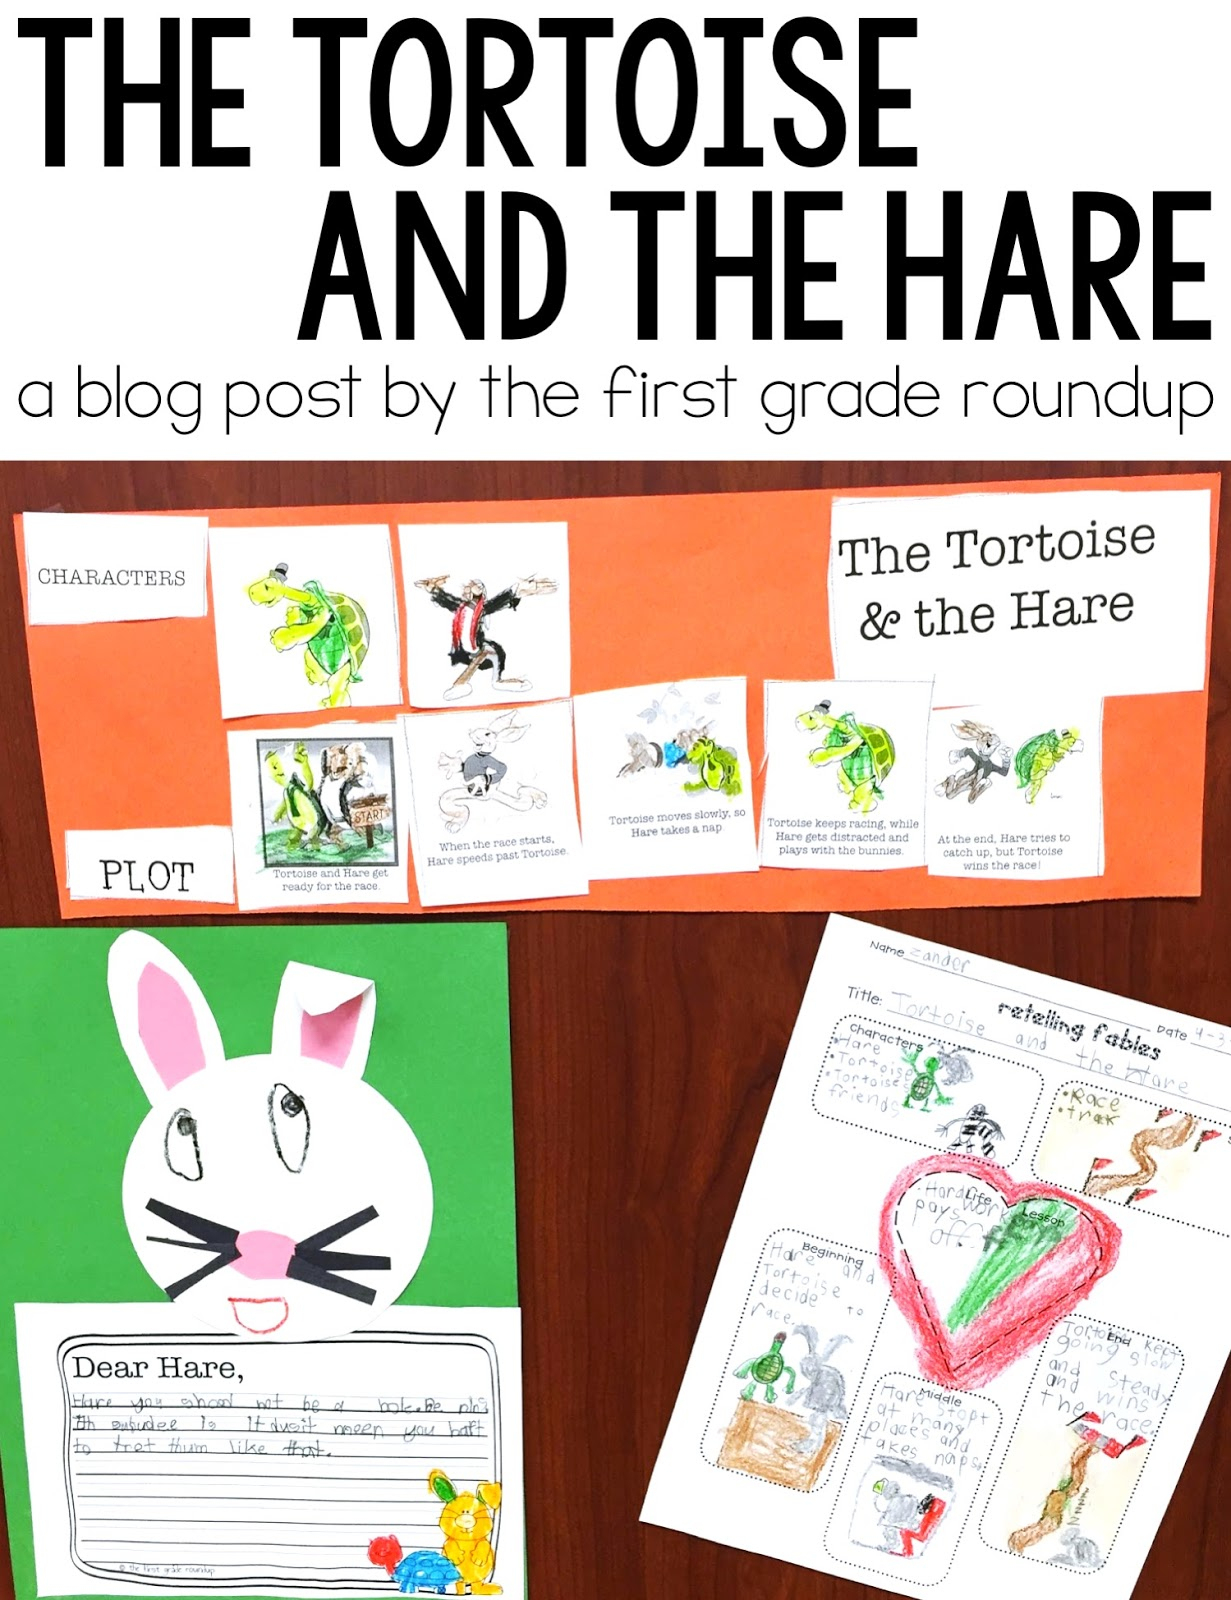 the-tortoise-and-the-hare-lesson-plan-preschool-lesson-plans-learning